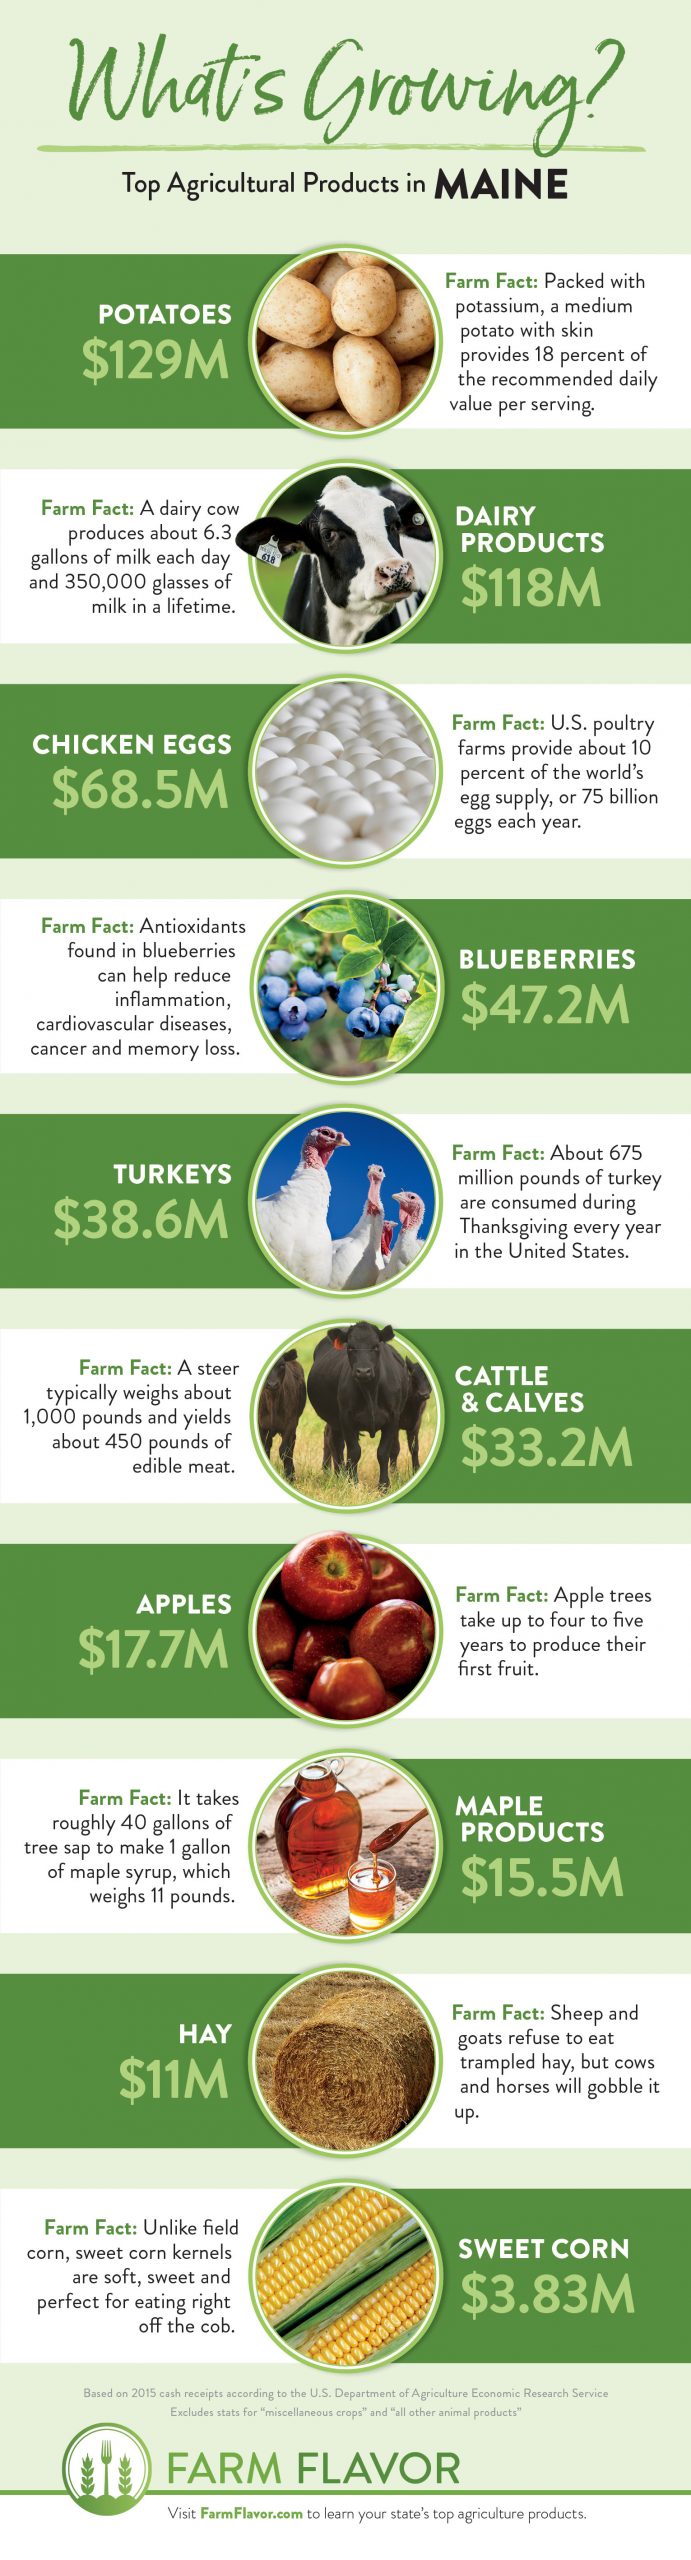 Maine Top 10 ag products